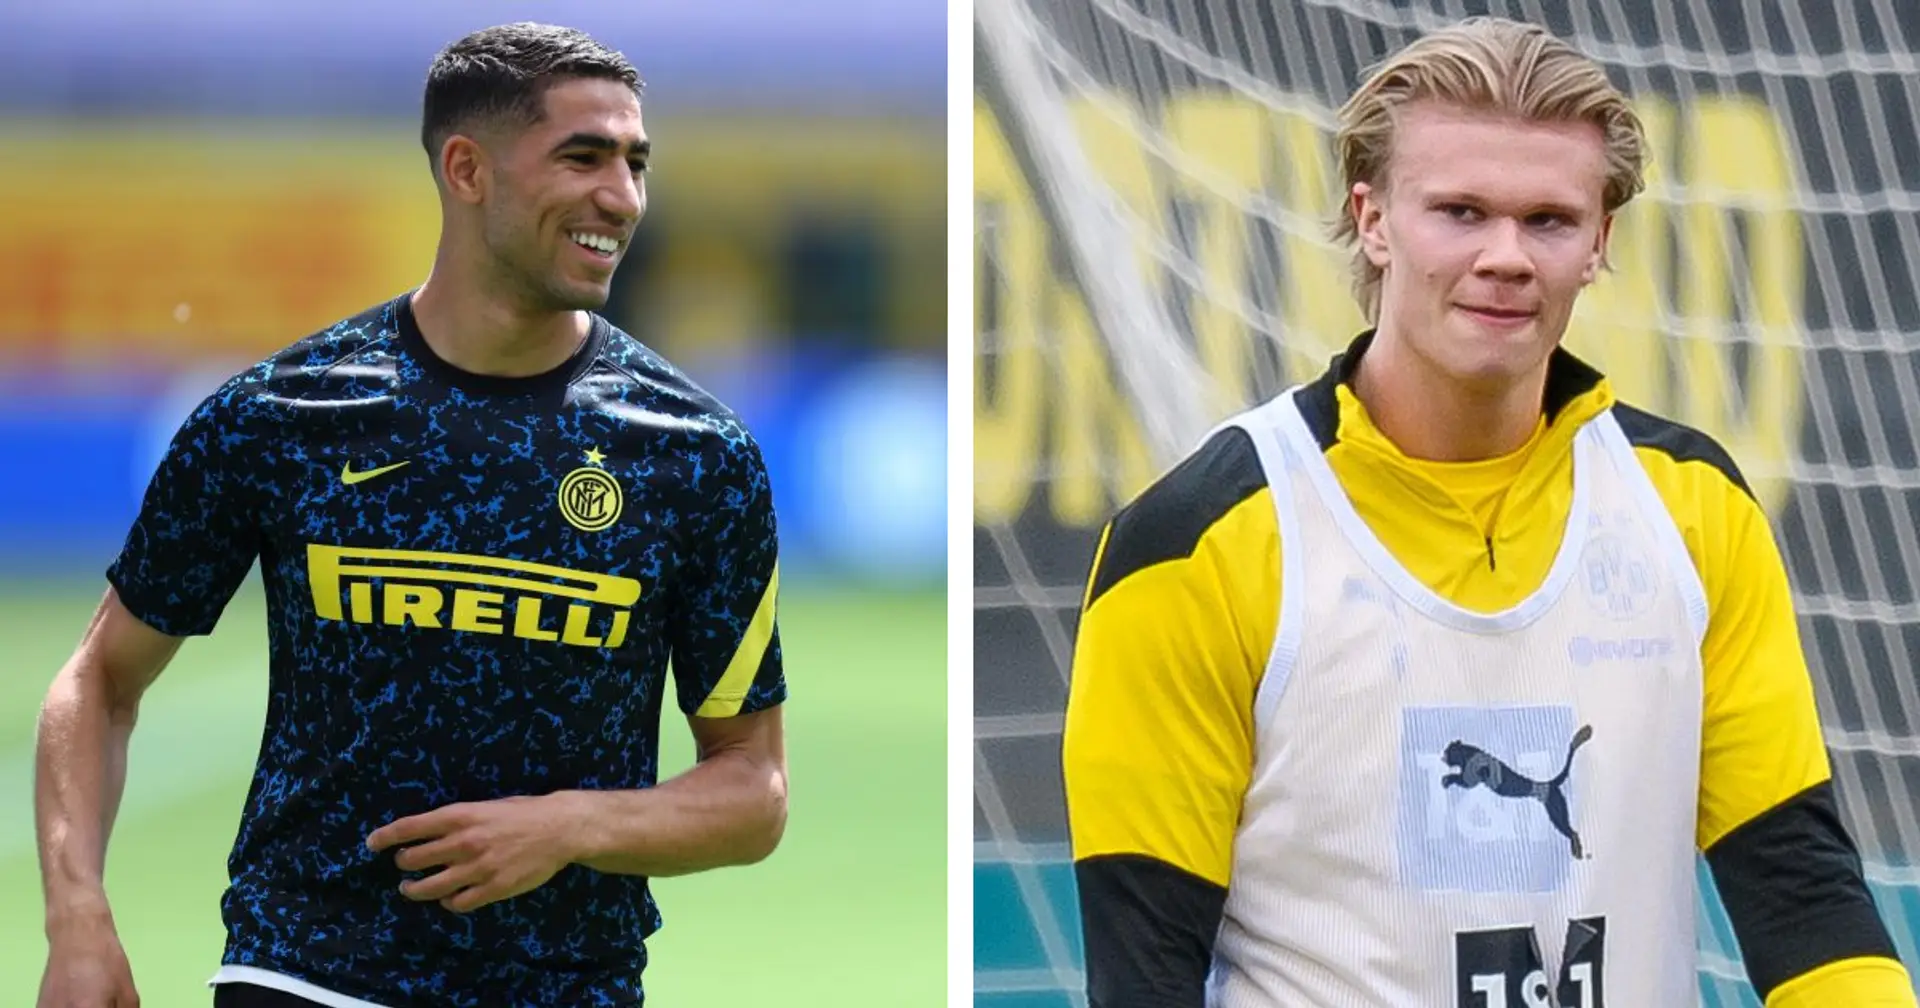 Chelsea make contact with clubs for Haaland and Hakimi: Goal (reliability: 4 stars)